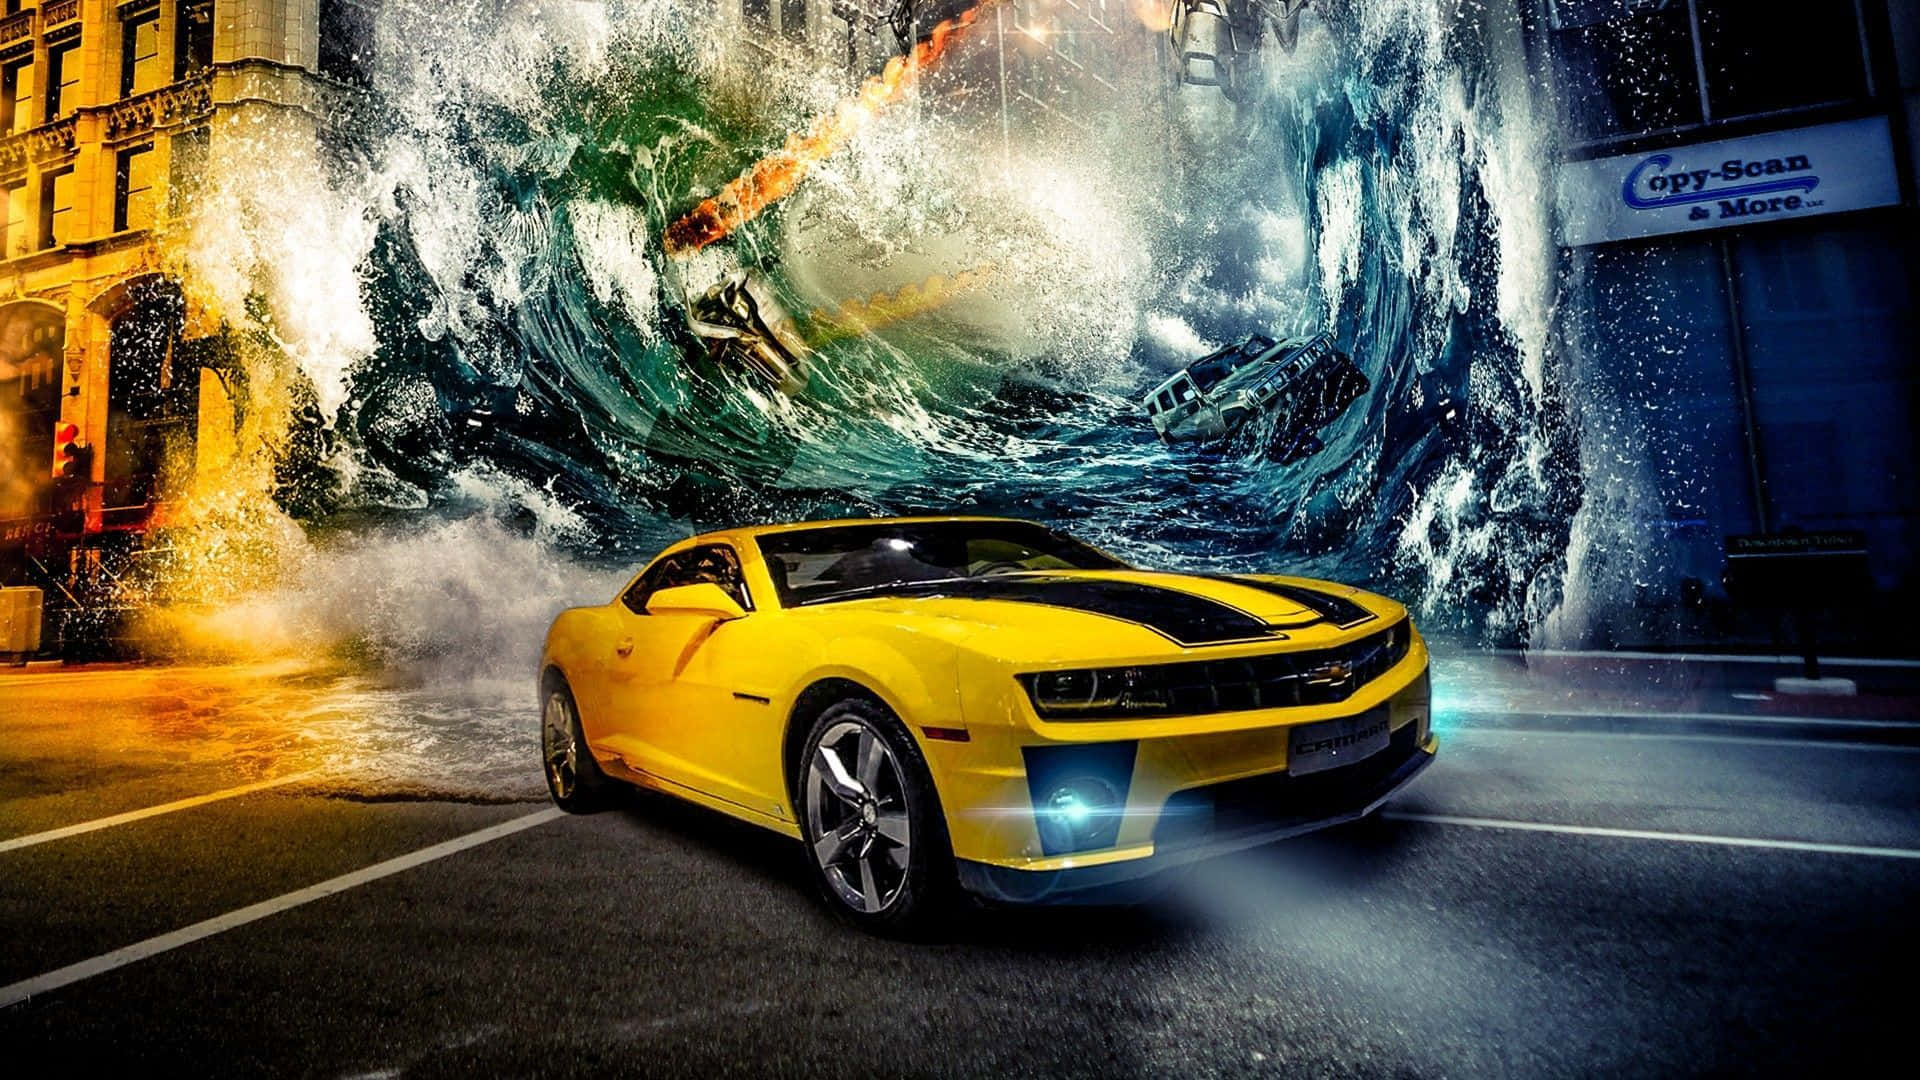 Professional Car Detailing On A Yellow Sports Car Wallpaper